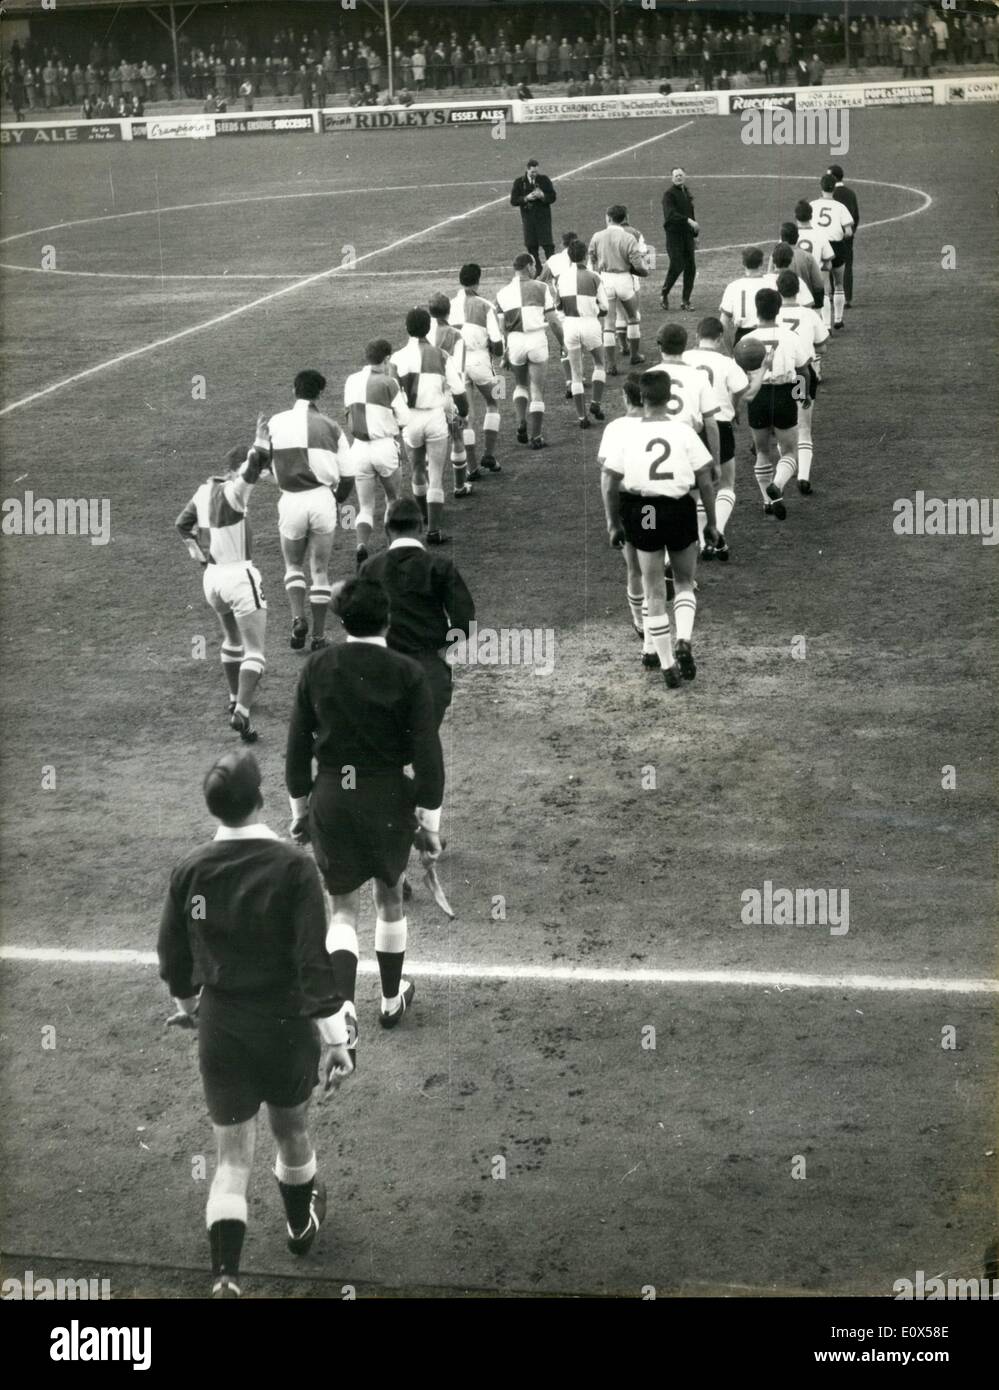 Apr. 04, 1965 - Prison Football Team Wins a Cup Final: The football team from Chelmsford Prison were last night allowed out for Stock Photo